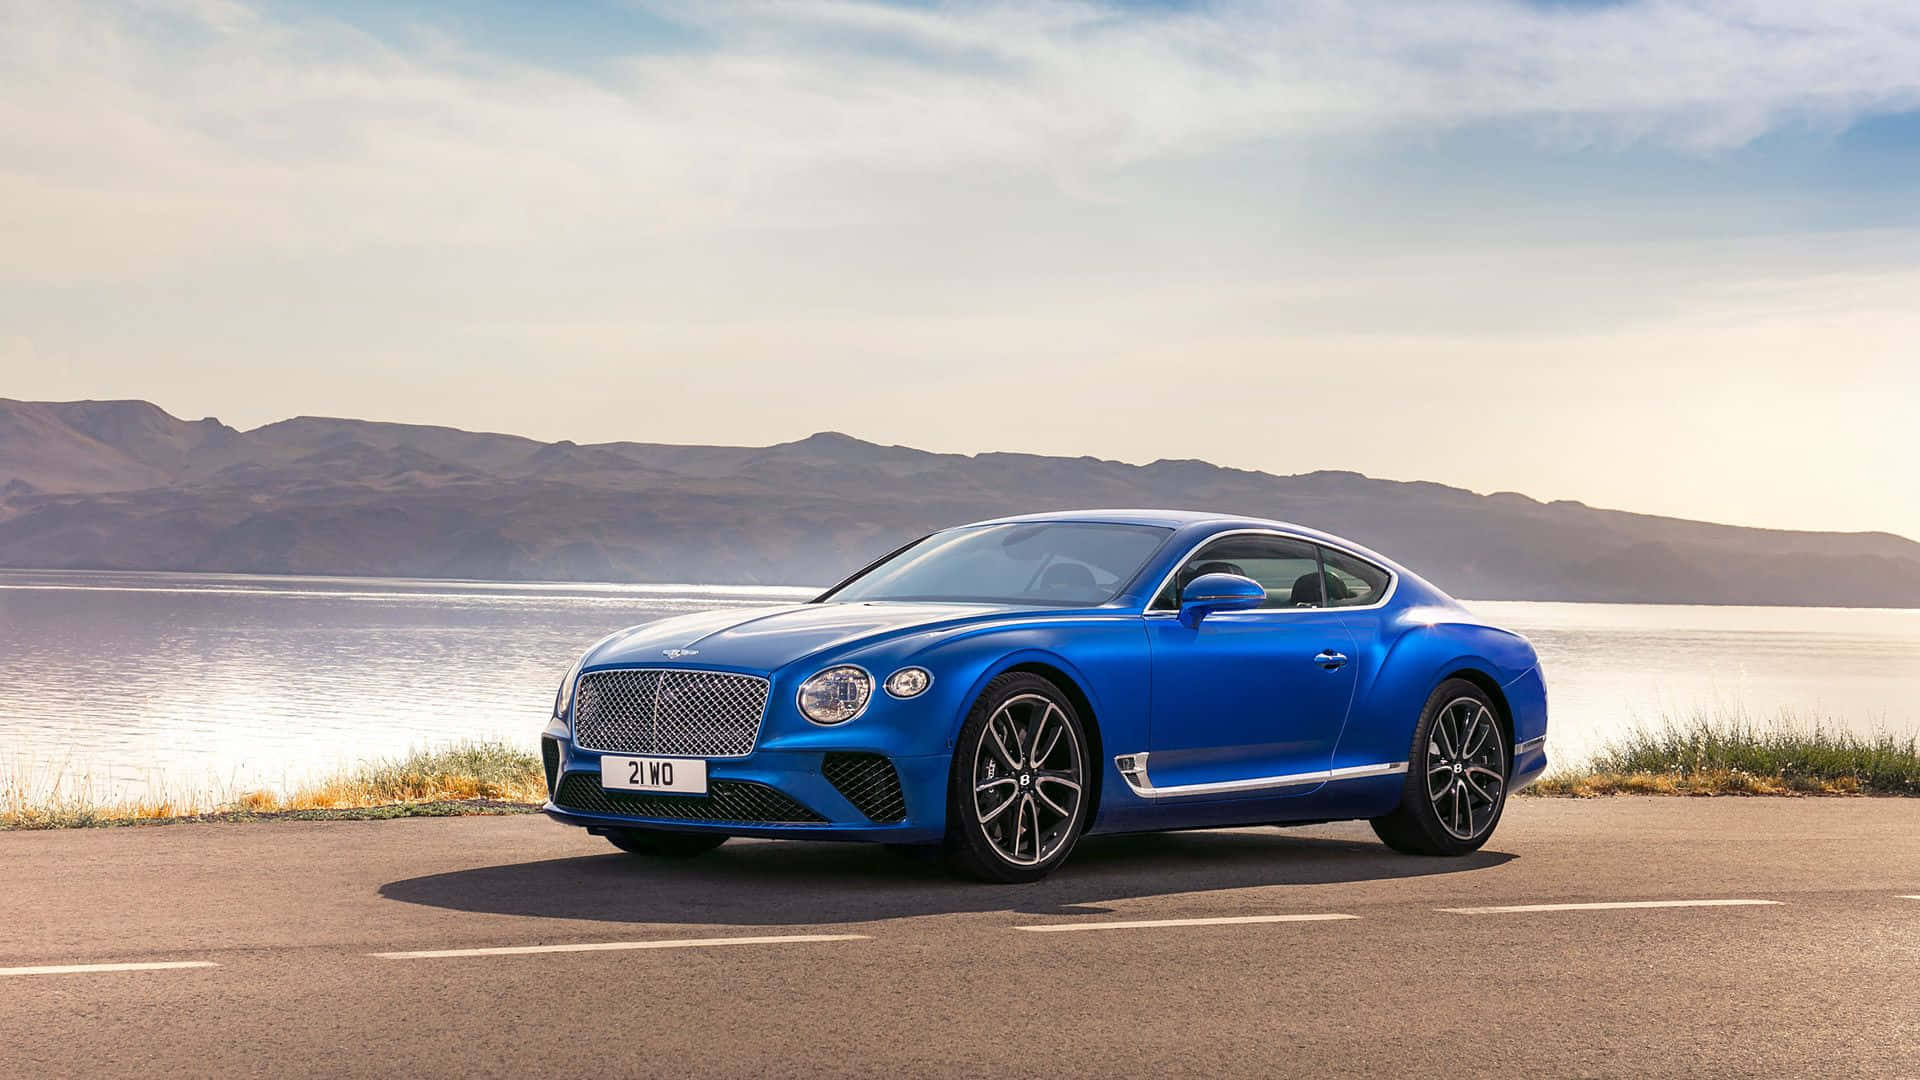 Luxury and style come together in a Bentley